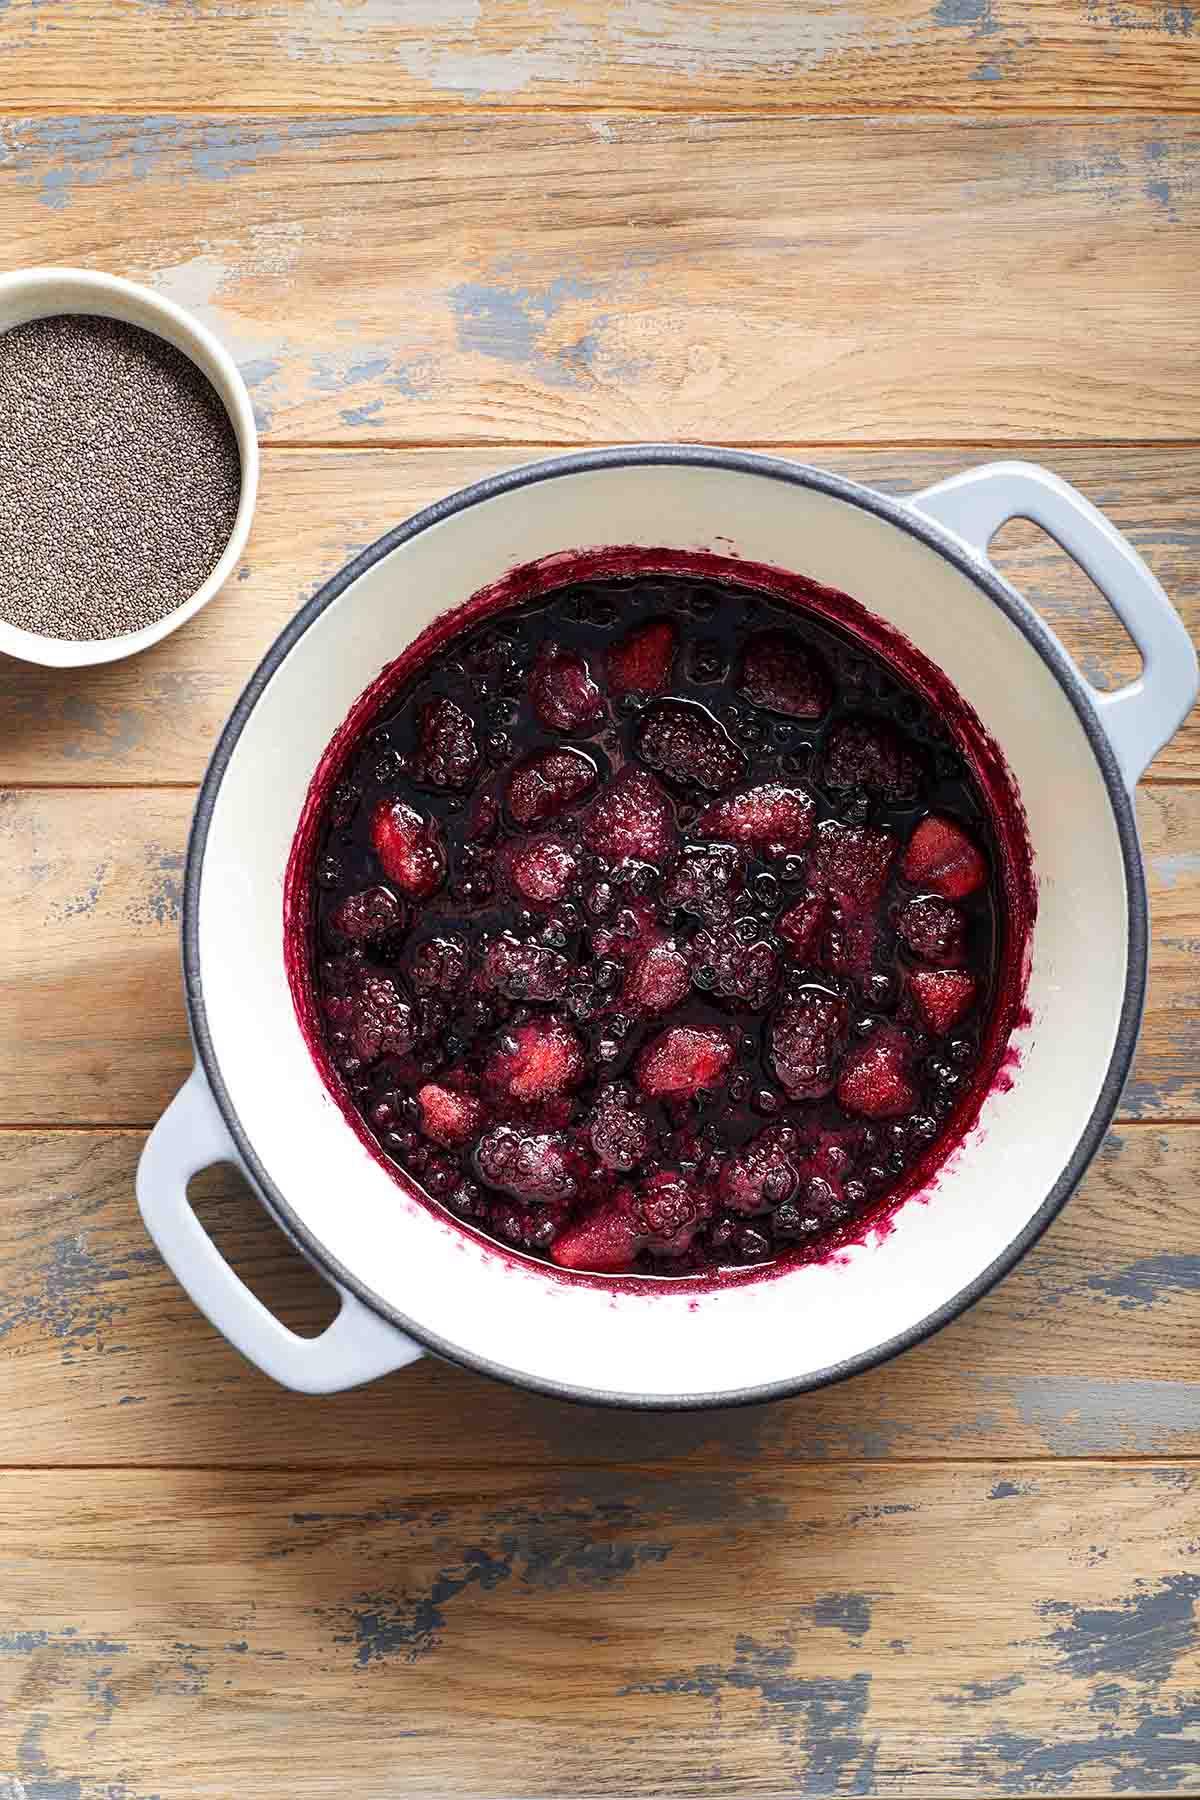 Berries cooked down in a pot with chia seeds on the side.